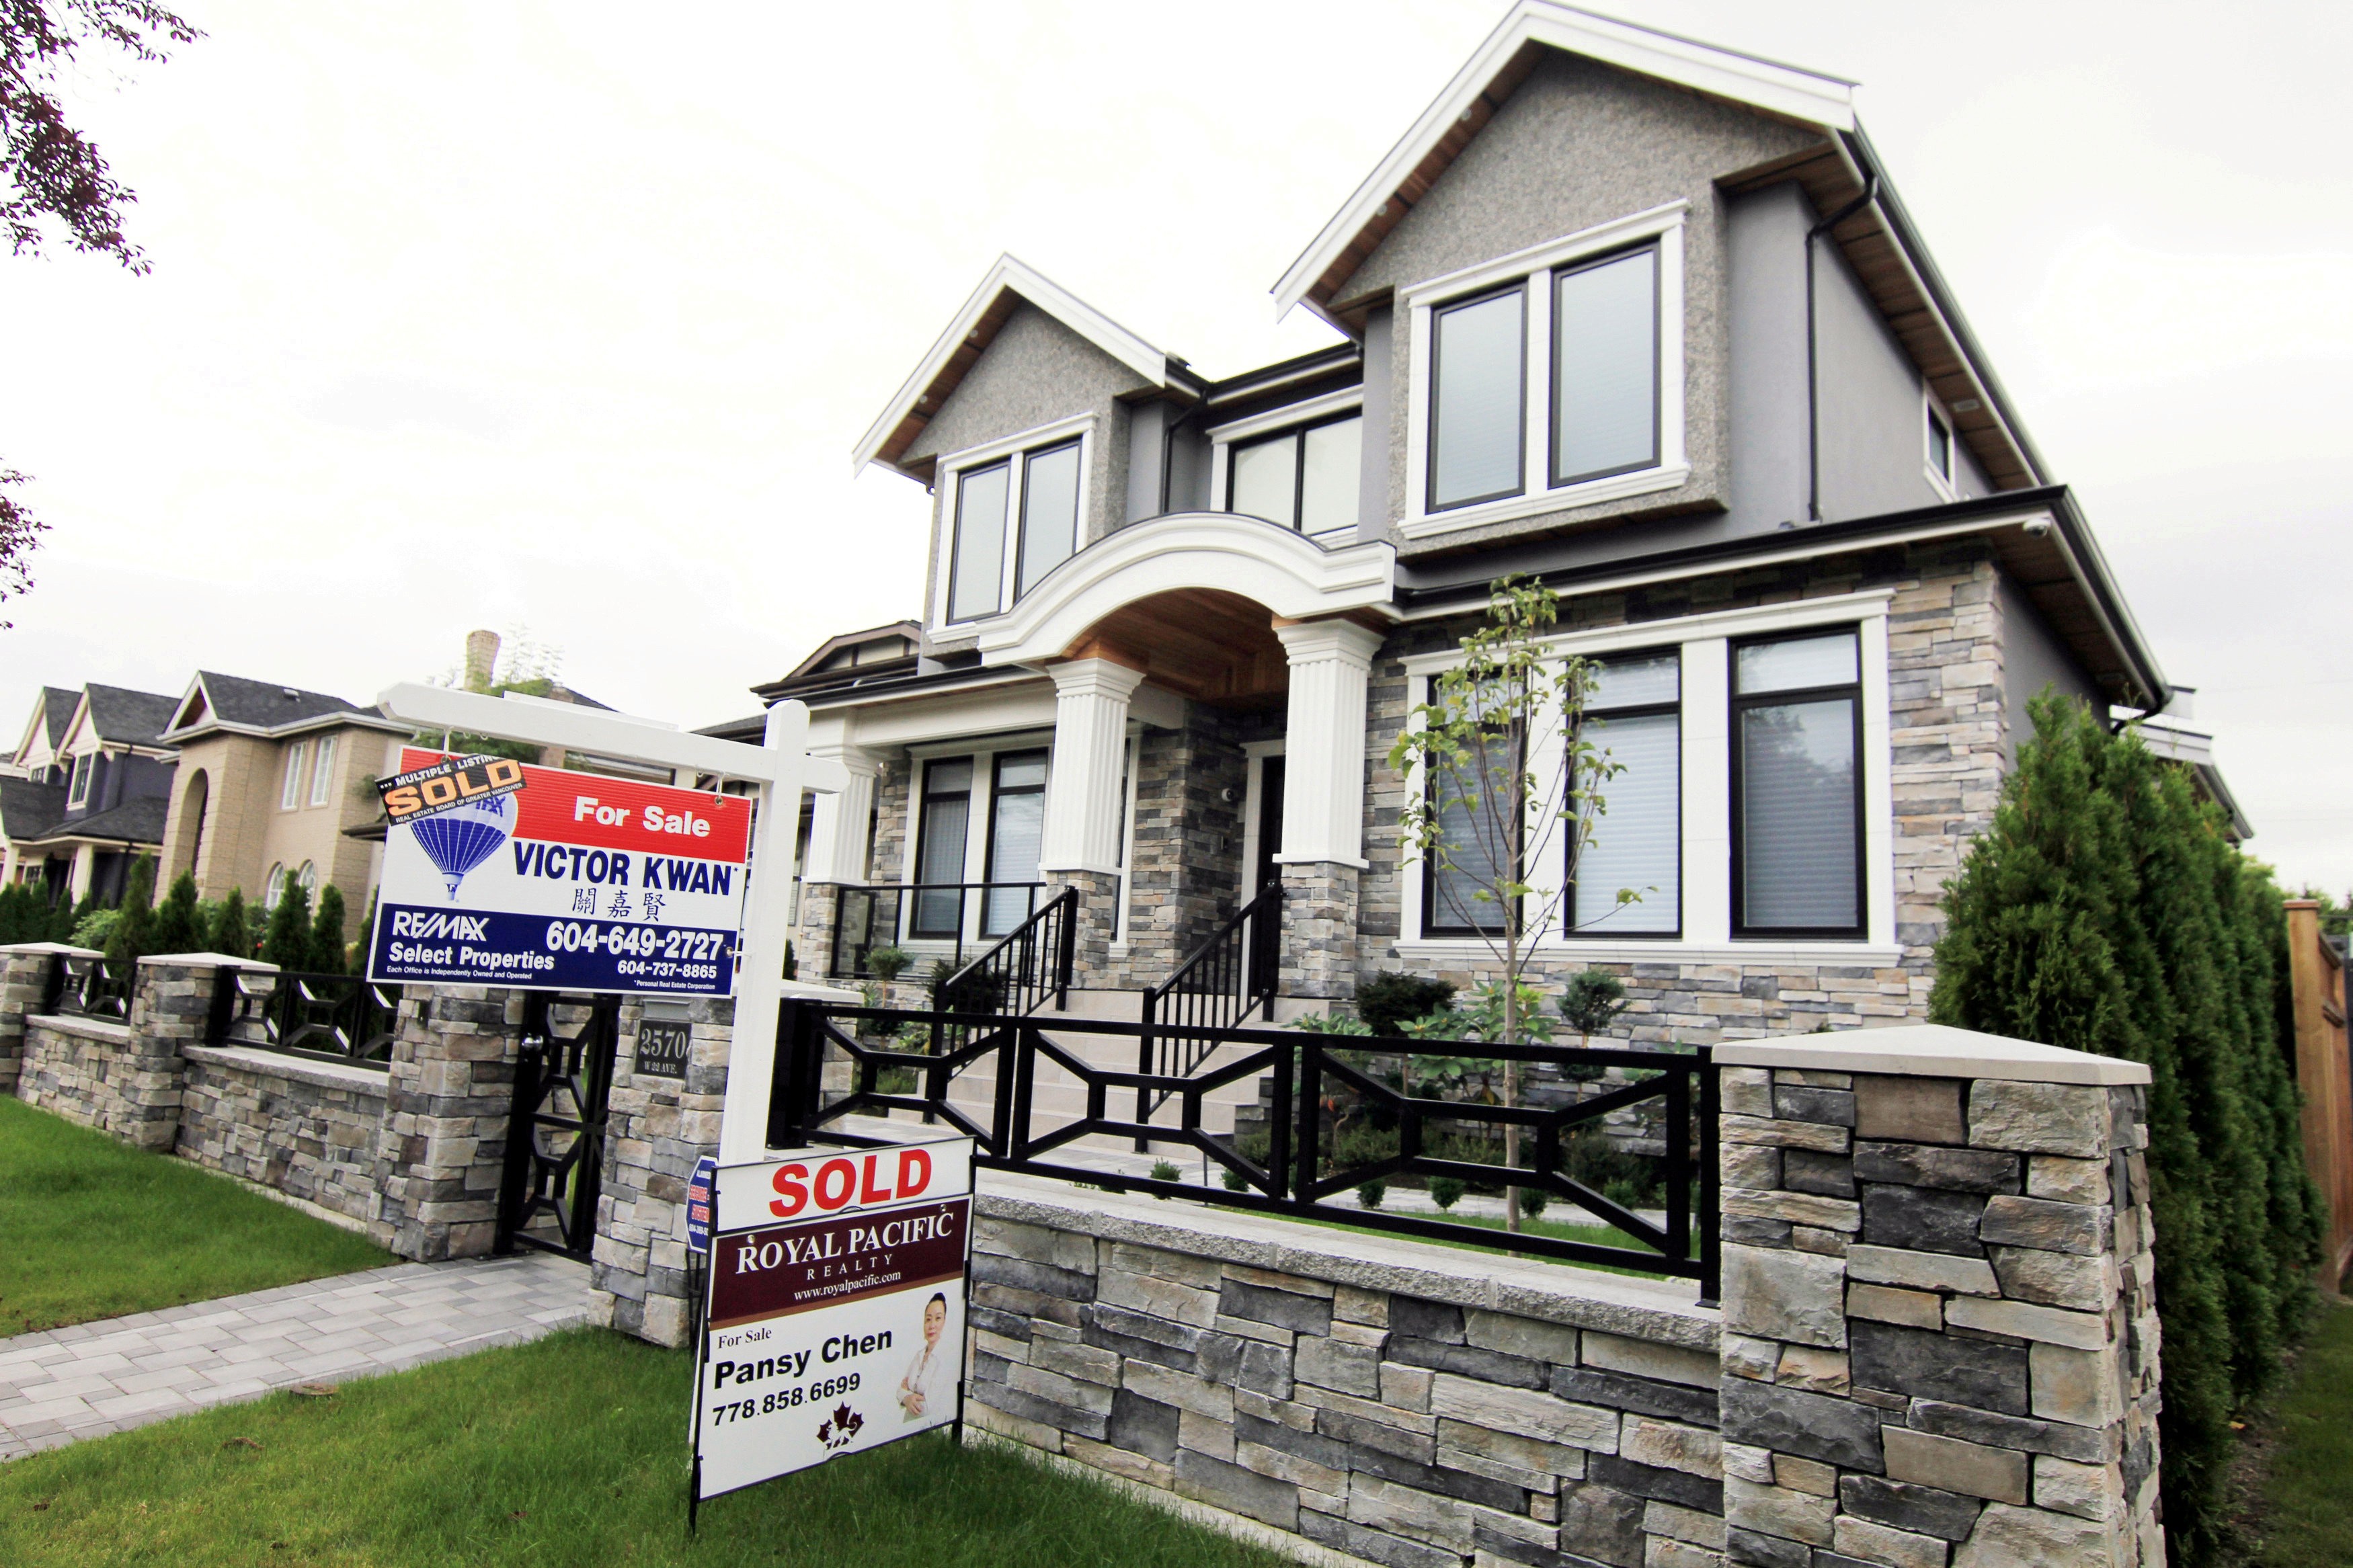 Luxury home prices are falling after consecutive years of gains in Vancouver. Photo: Reuters